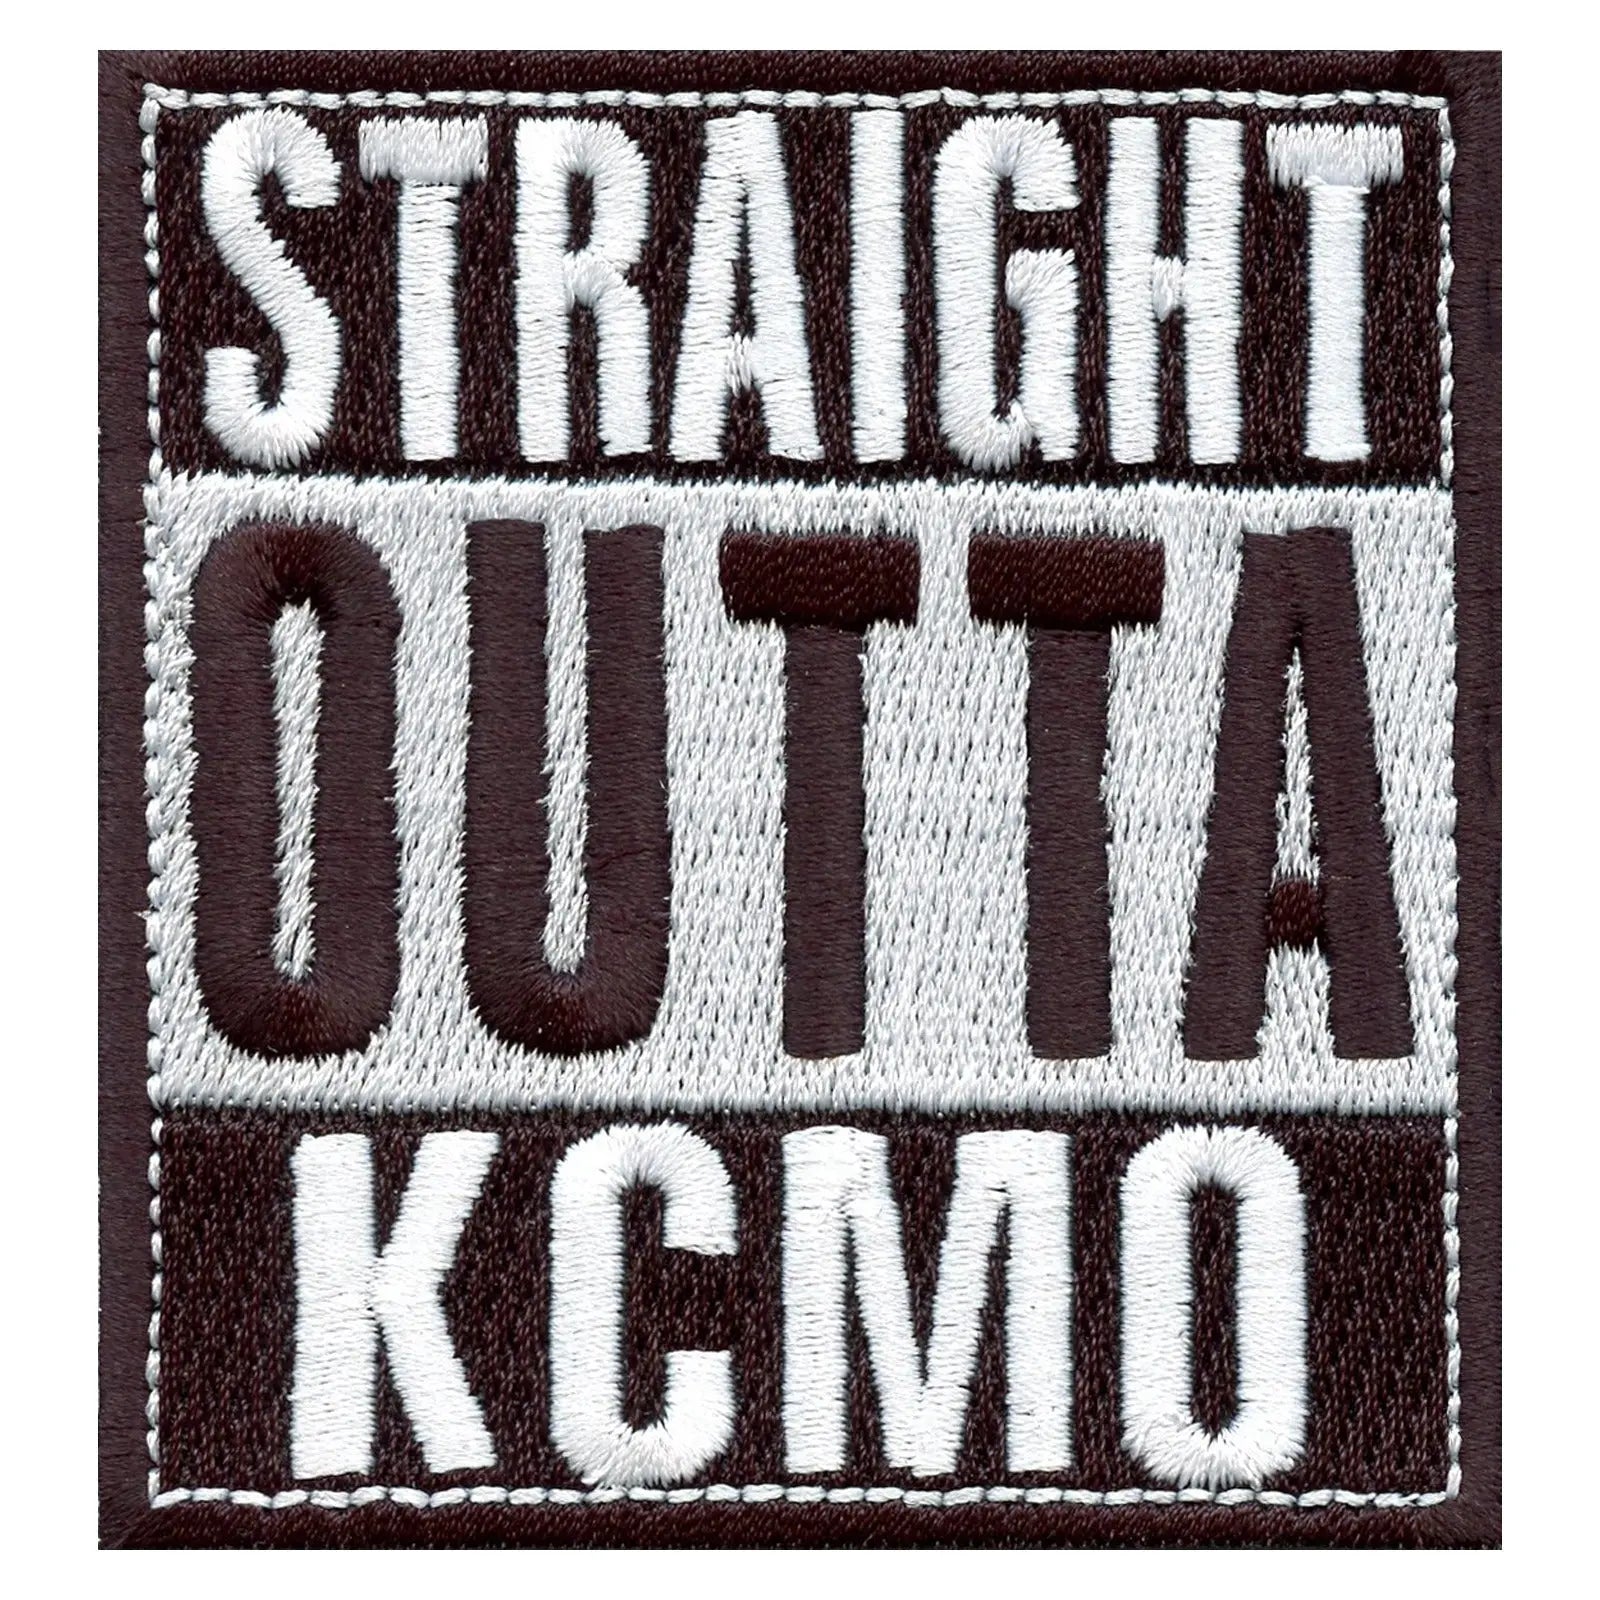 Straight Outta KCMO Embroidered Iron on Patch 